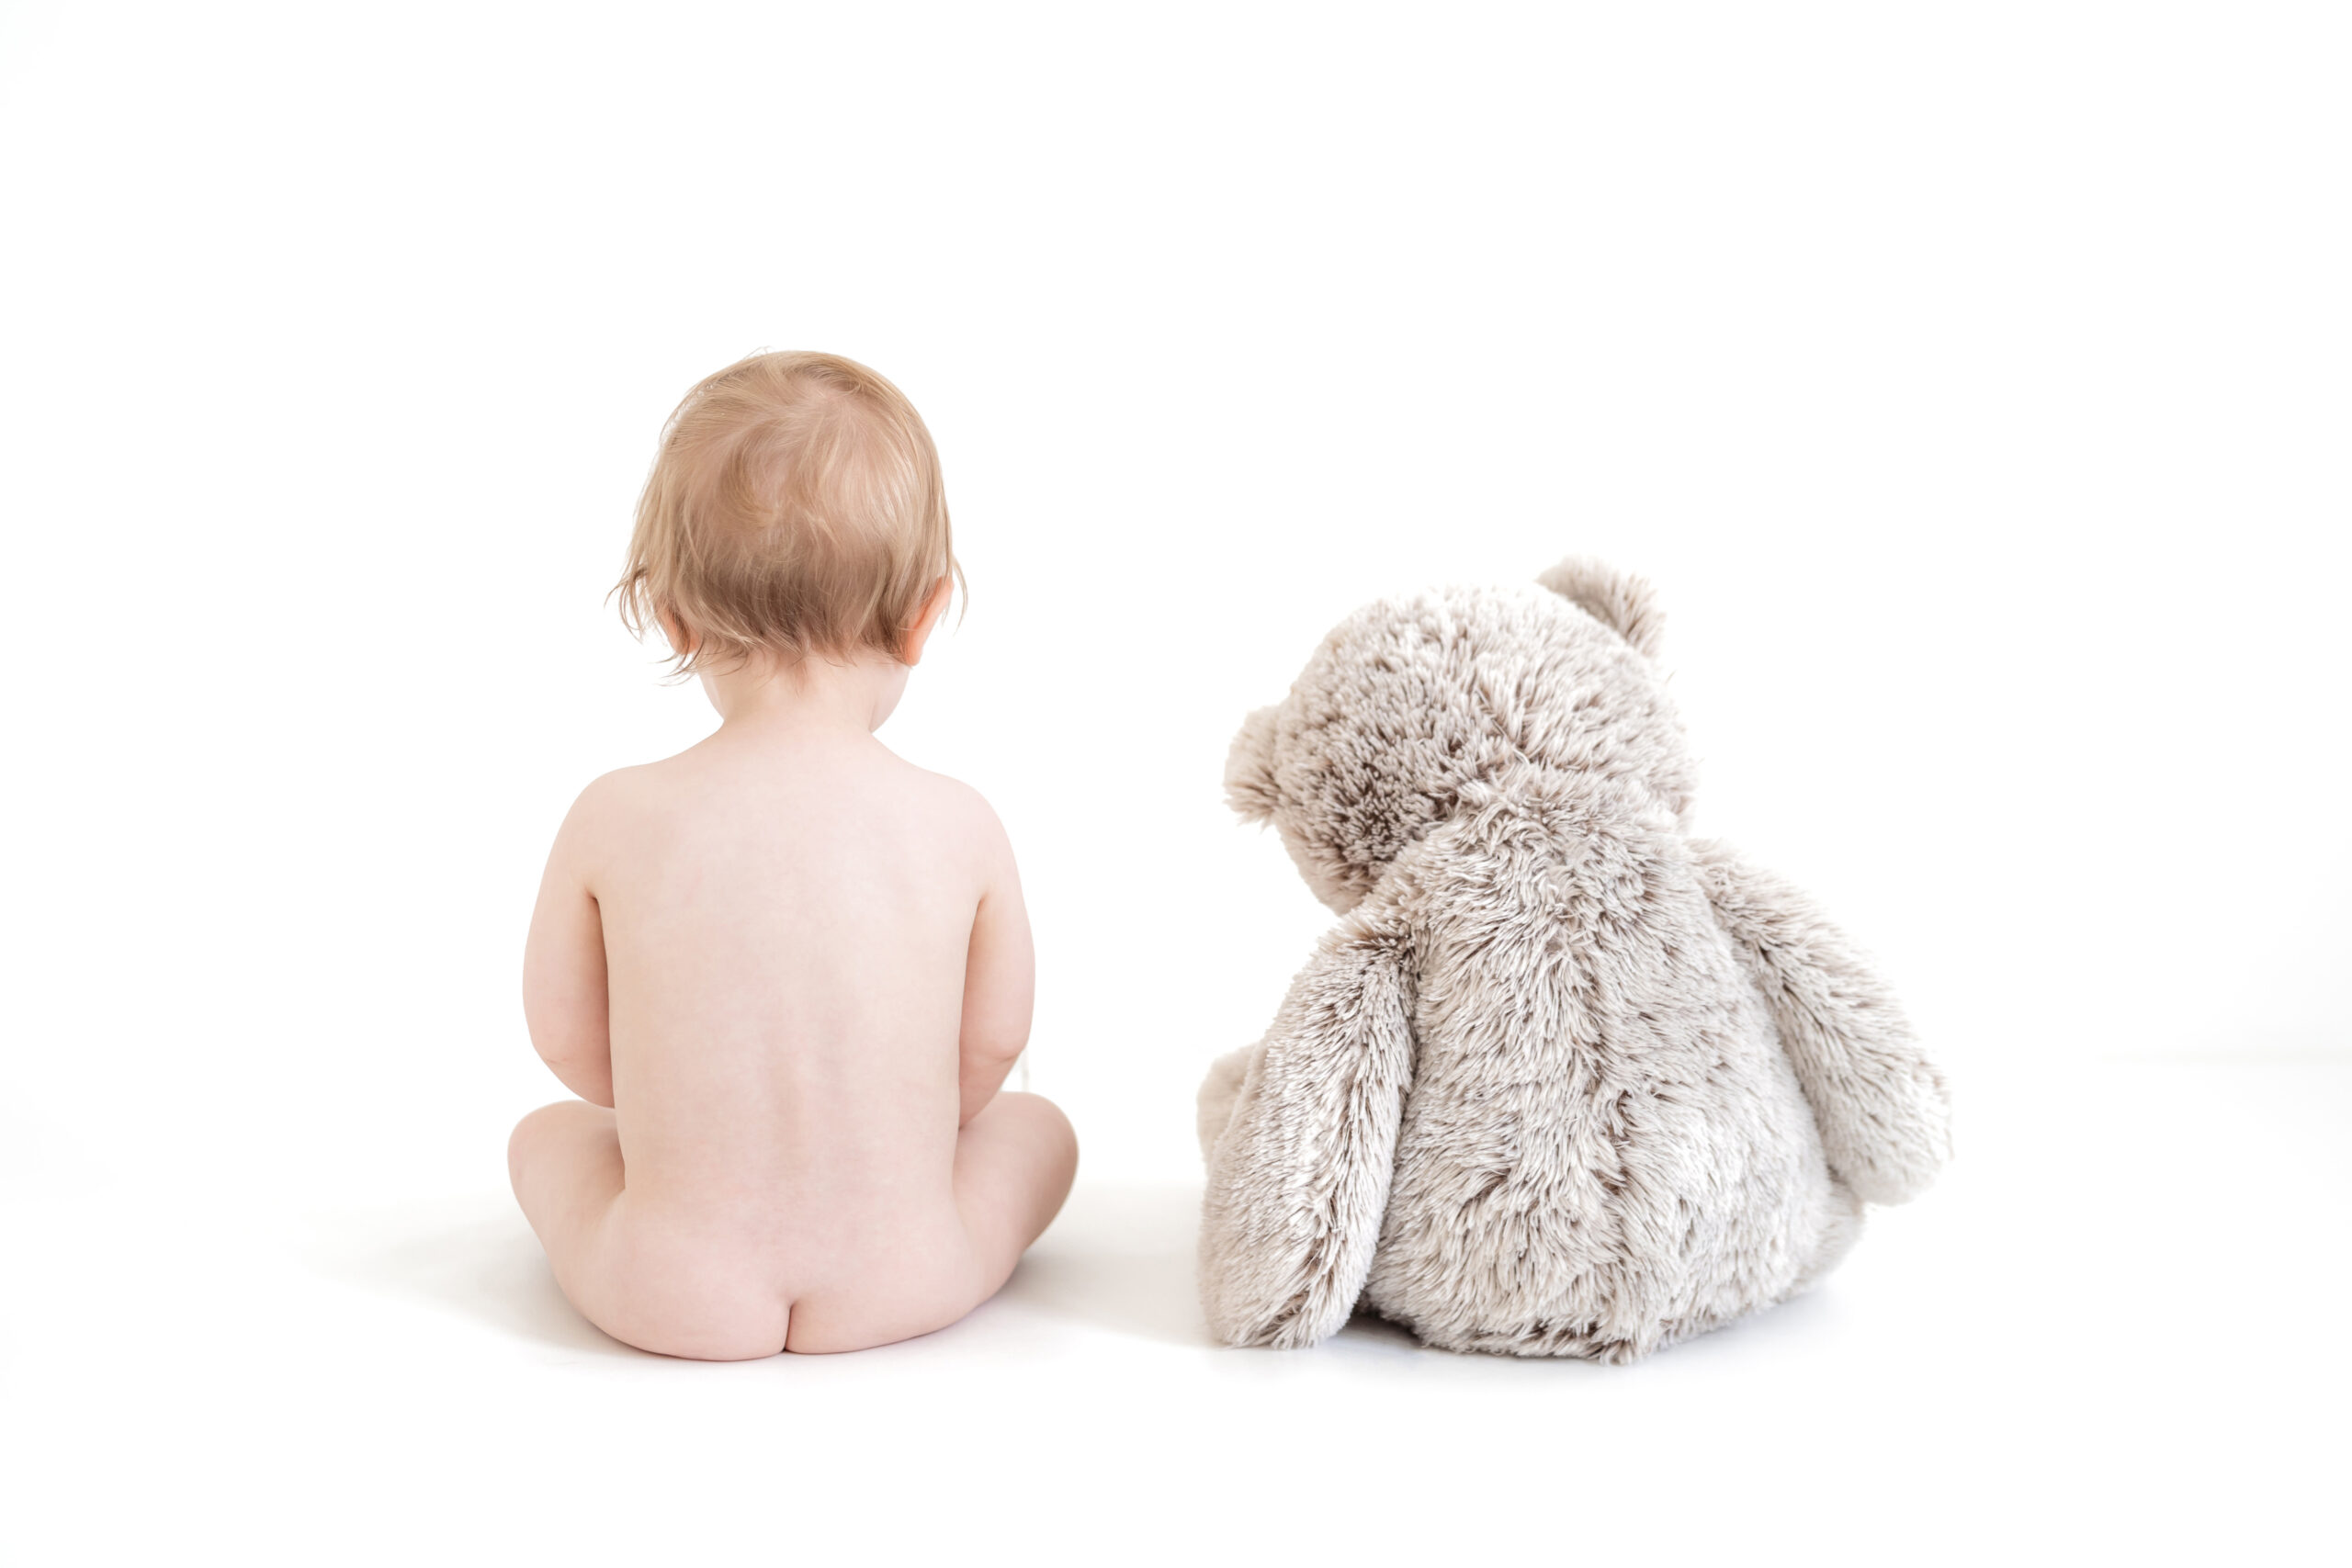 Baby and Teddy Bear sat with their backs towards the camera against a white background.